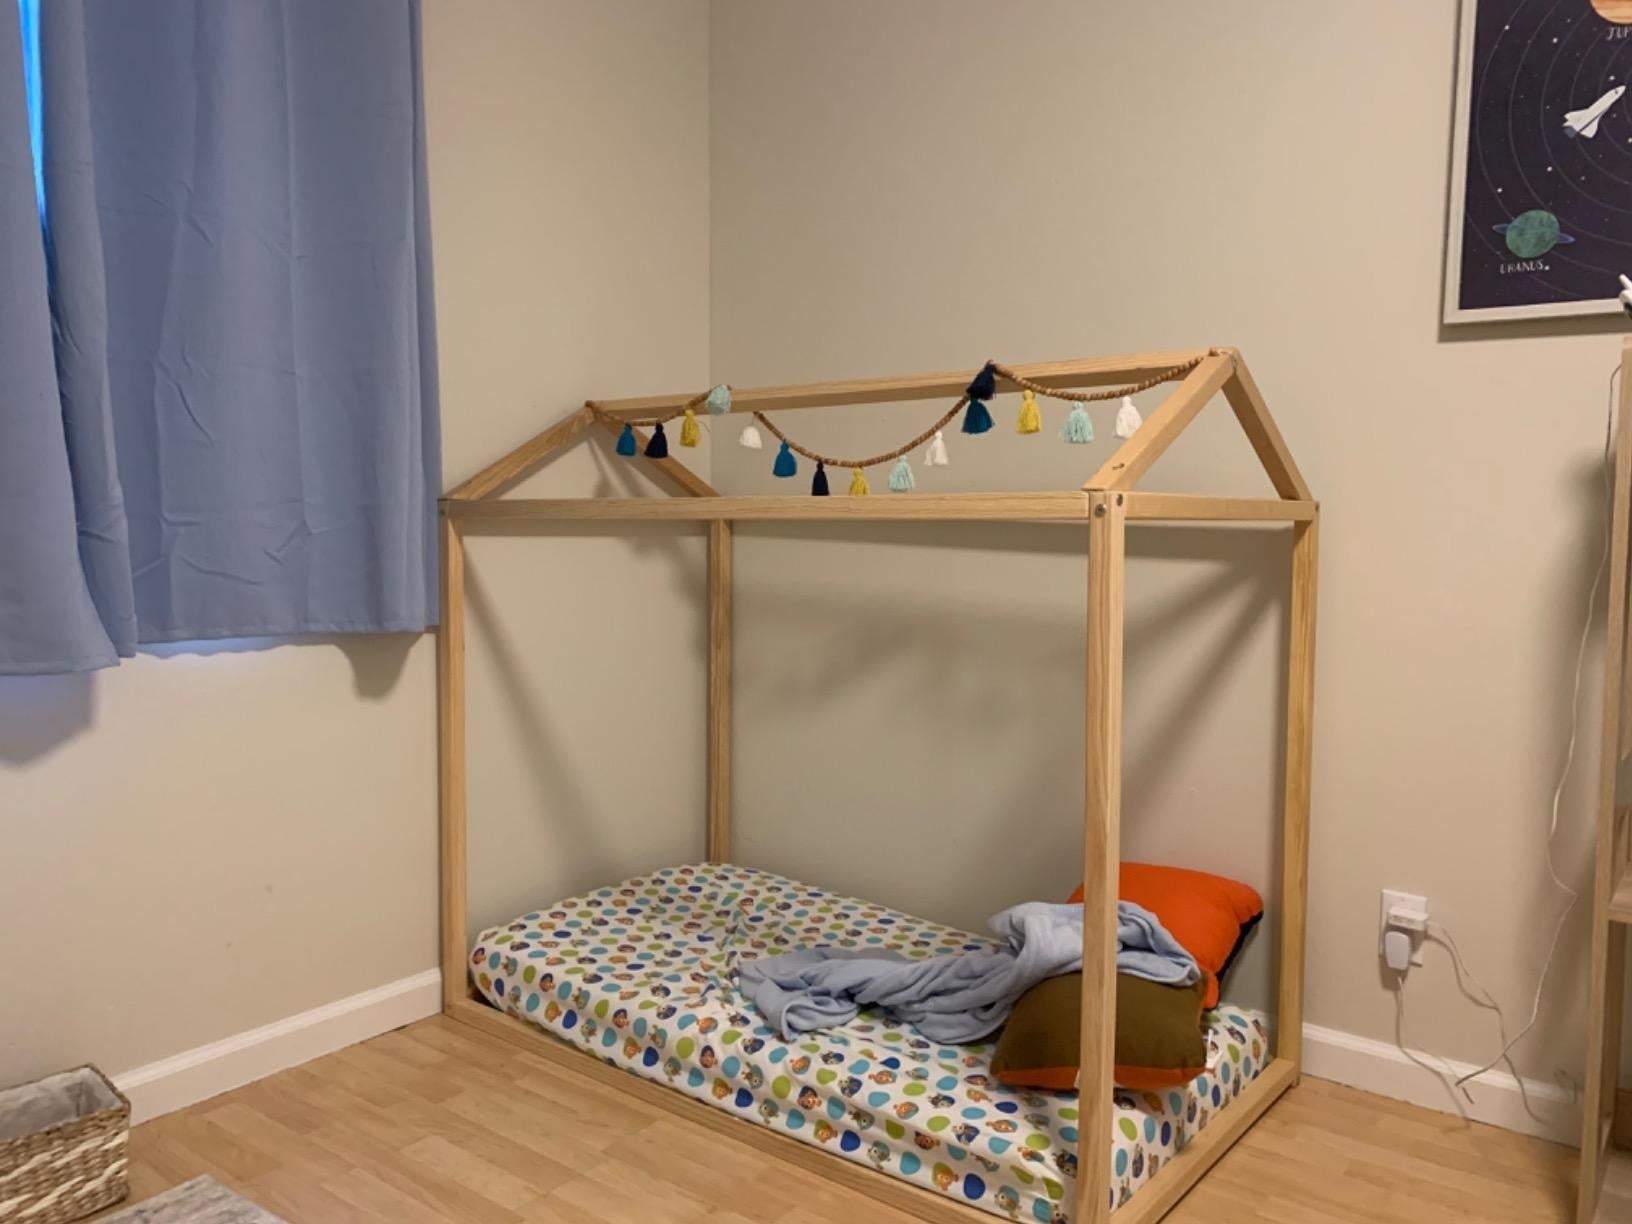 15 Best Toddler Beds So You And Your Kid Can Sleep Well